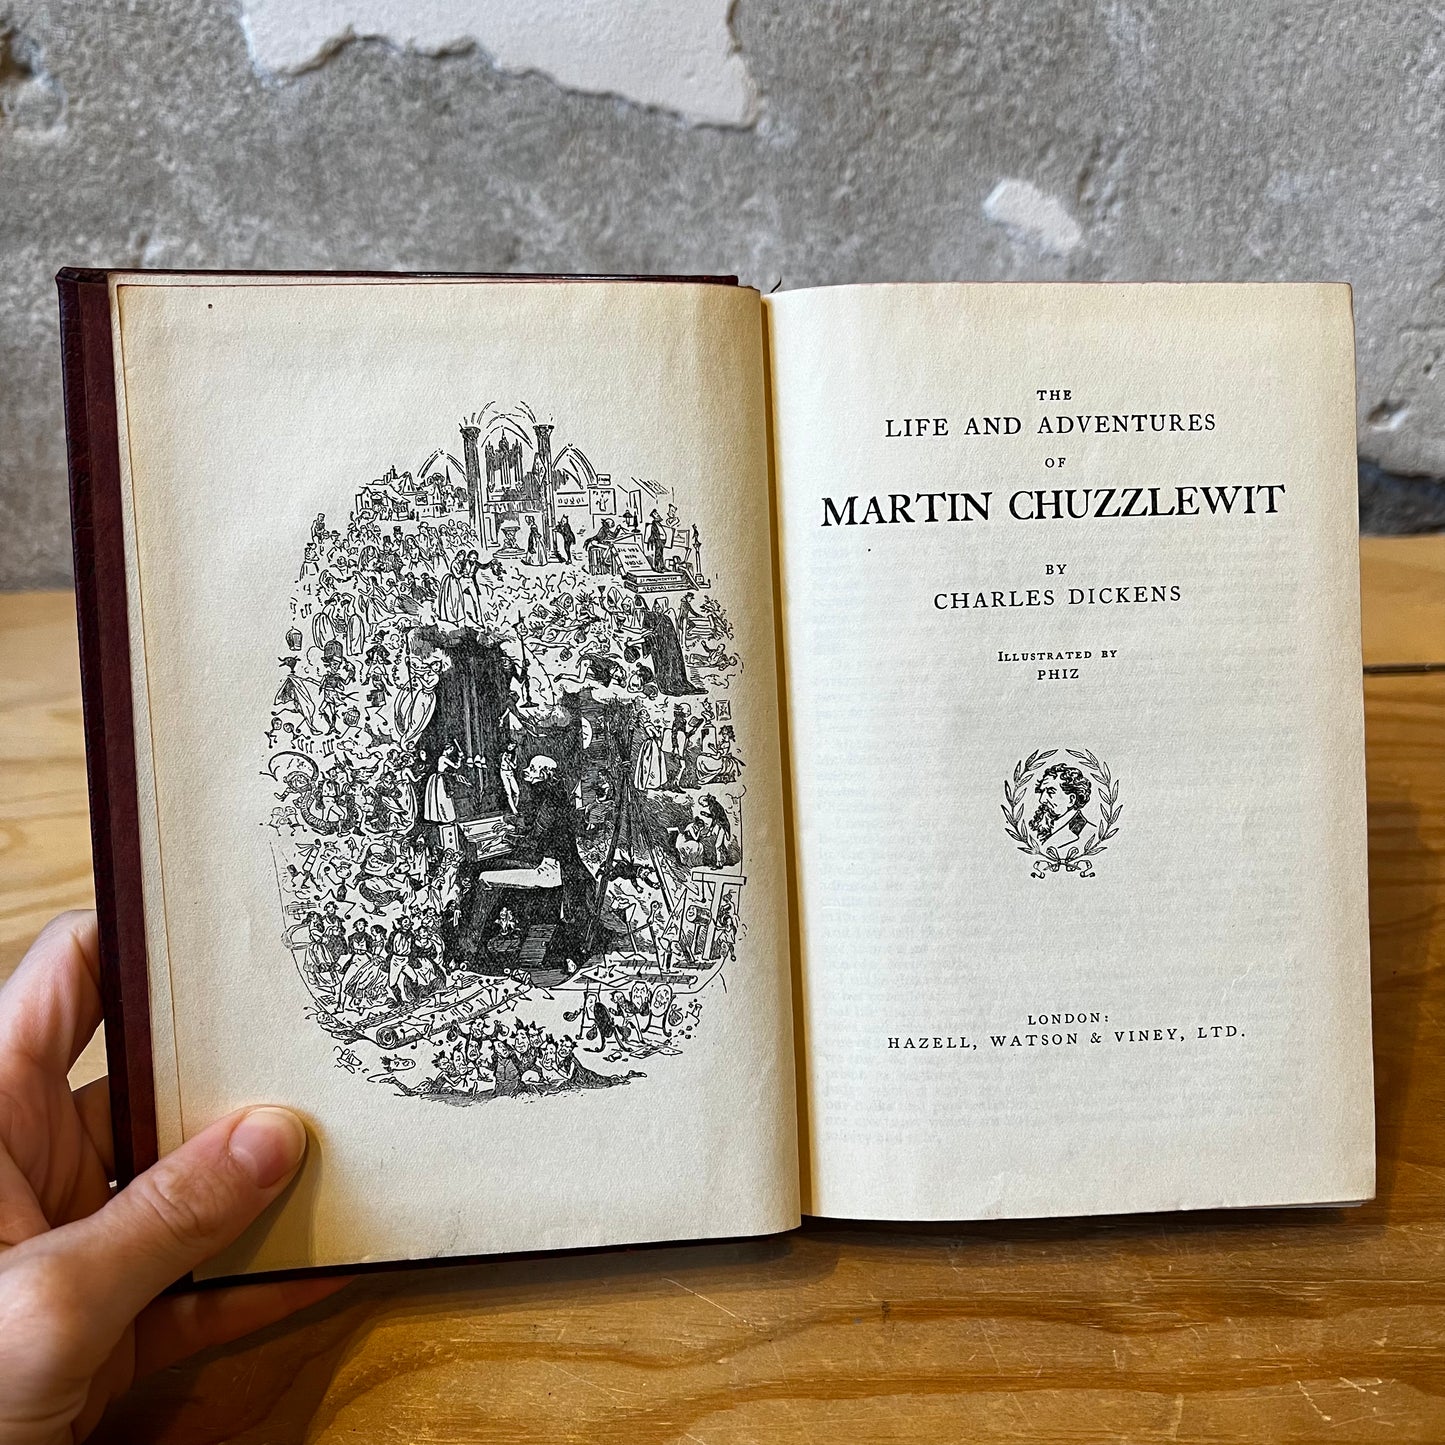 The Life and Adventures of Martin Chuzzlewit – Charles Dickens